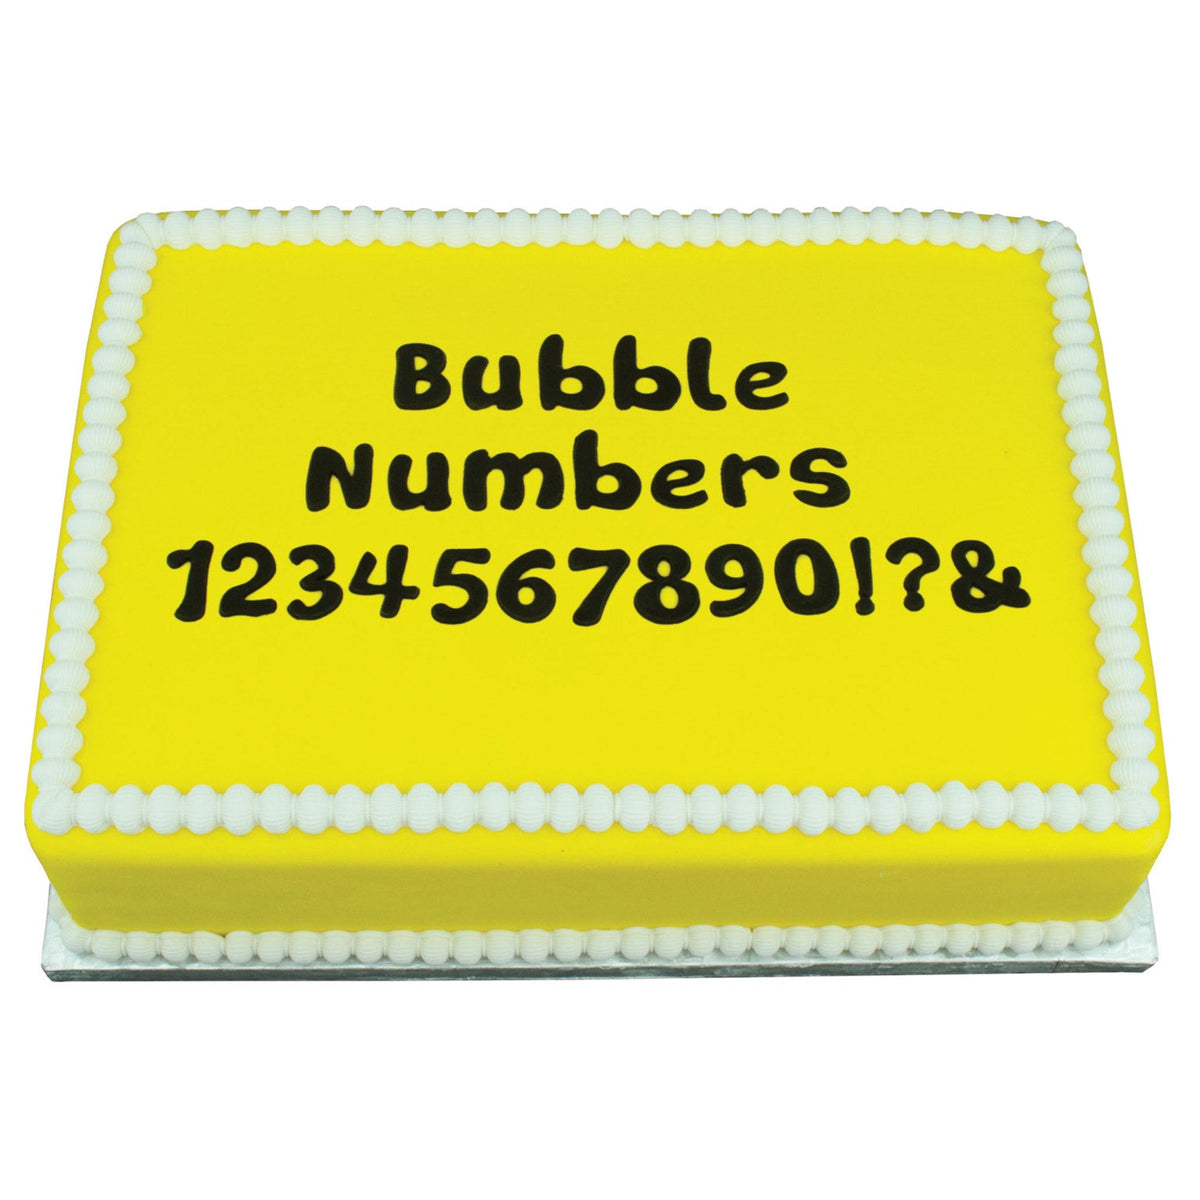 Decorated Cake using Bubble Flexabet Numbers Food Safe Silicone Letter Maker by Marvelous Molds